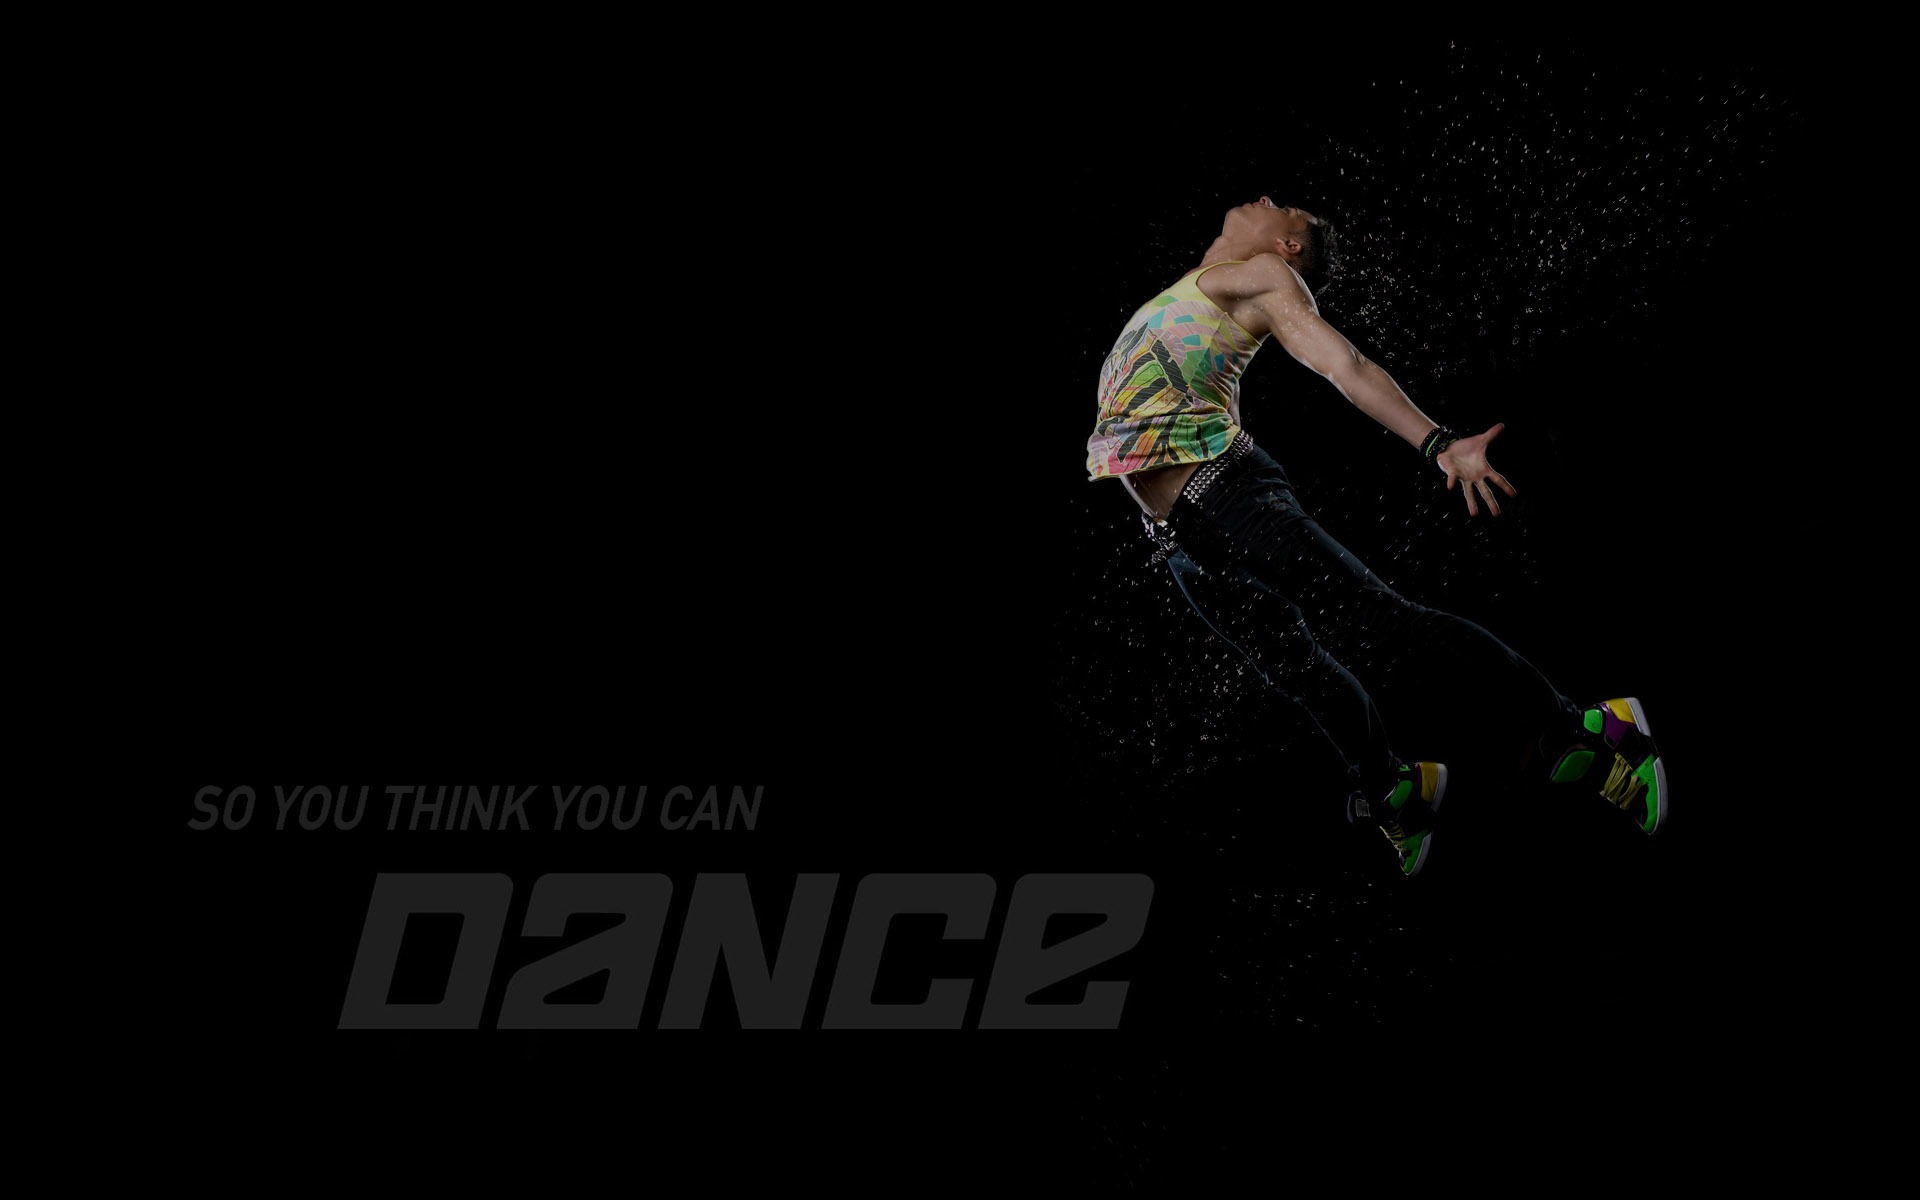 So You Think You Can Dance 舞林爭霸壁紙(二) #6 - 1920x1200